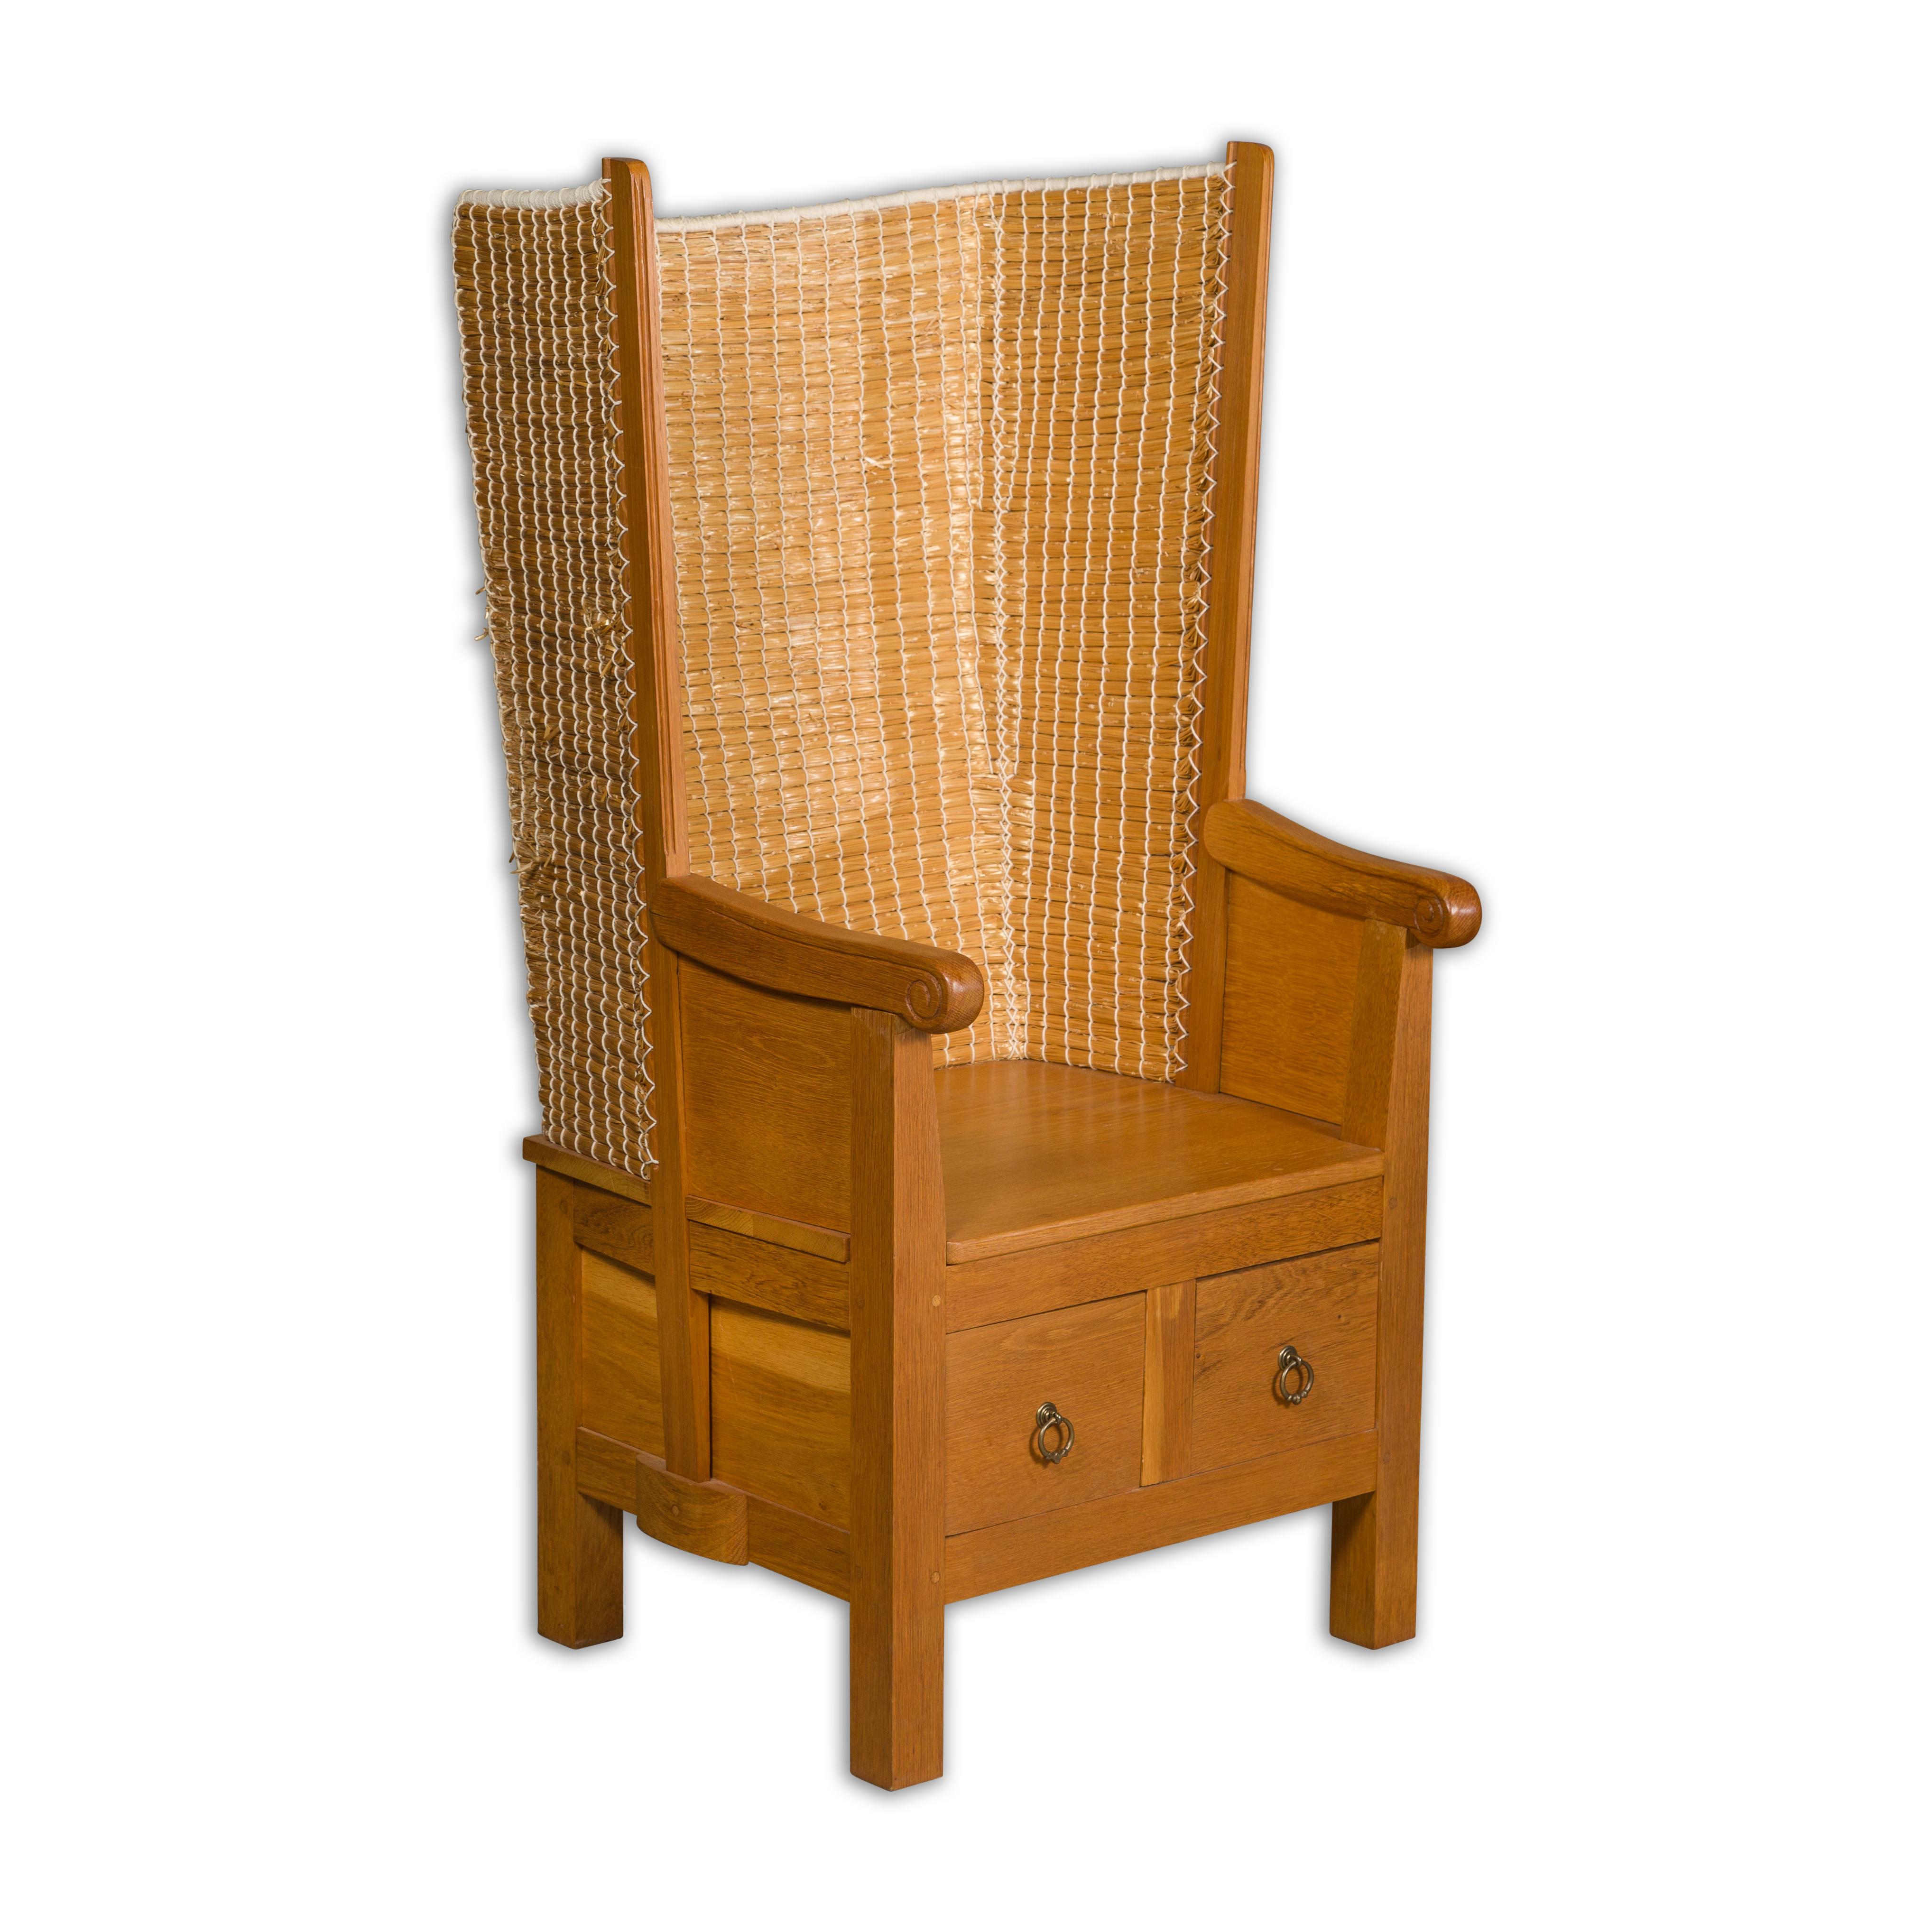 A vintage Scottish Orkney Island oak wingback chair with hand woven straw back, scrolling knuckles on the arms and two drawers in the lower section. A captivating vintage Scottish Orkney Island oak wingback chair from the mid 20th century, deftly